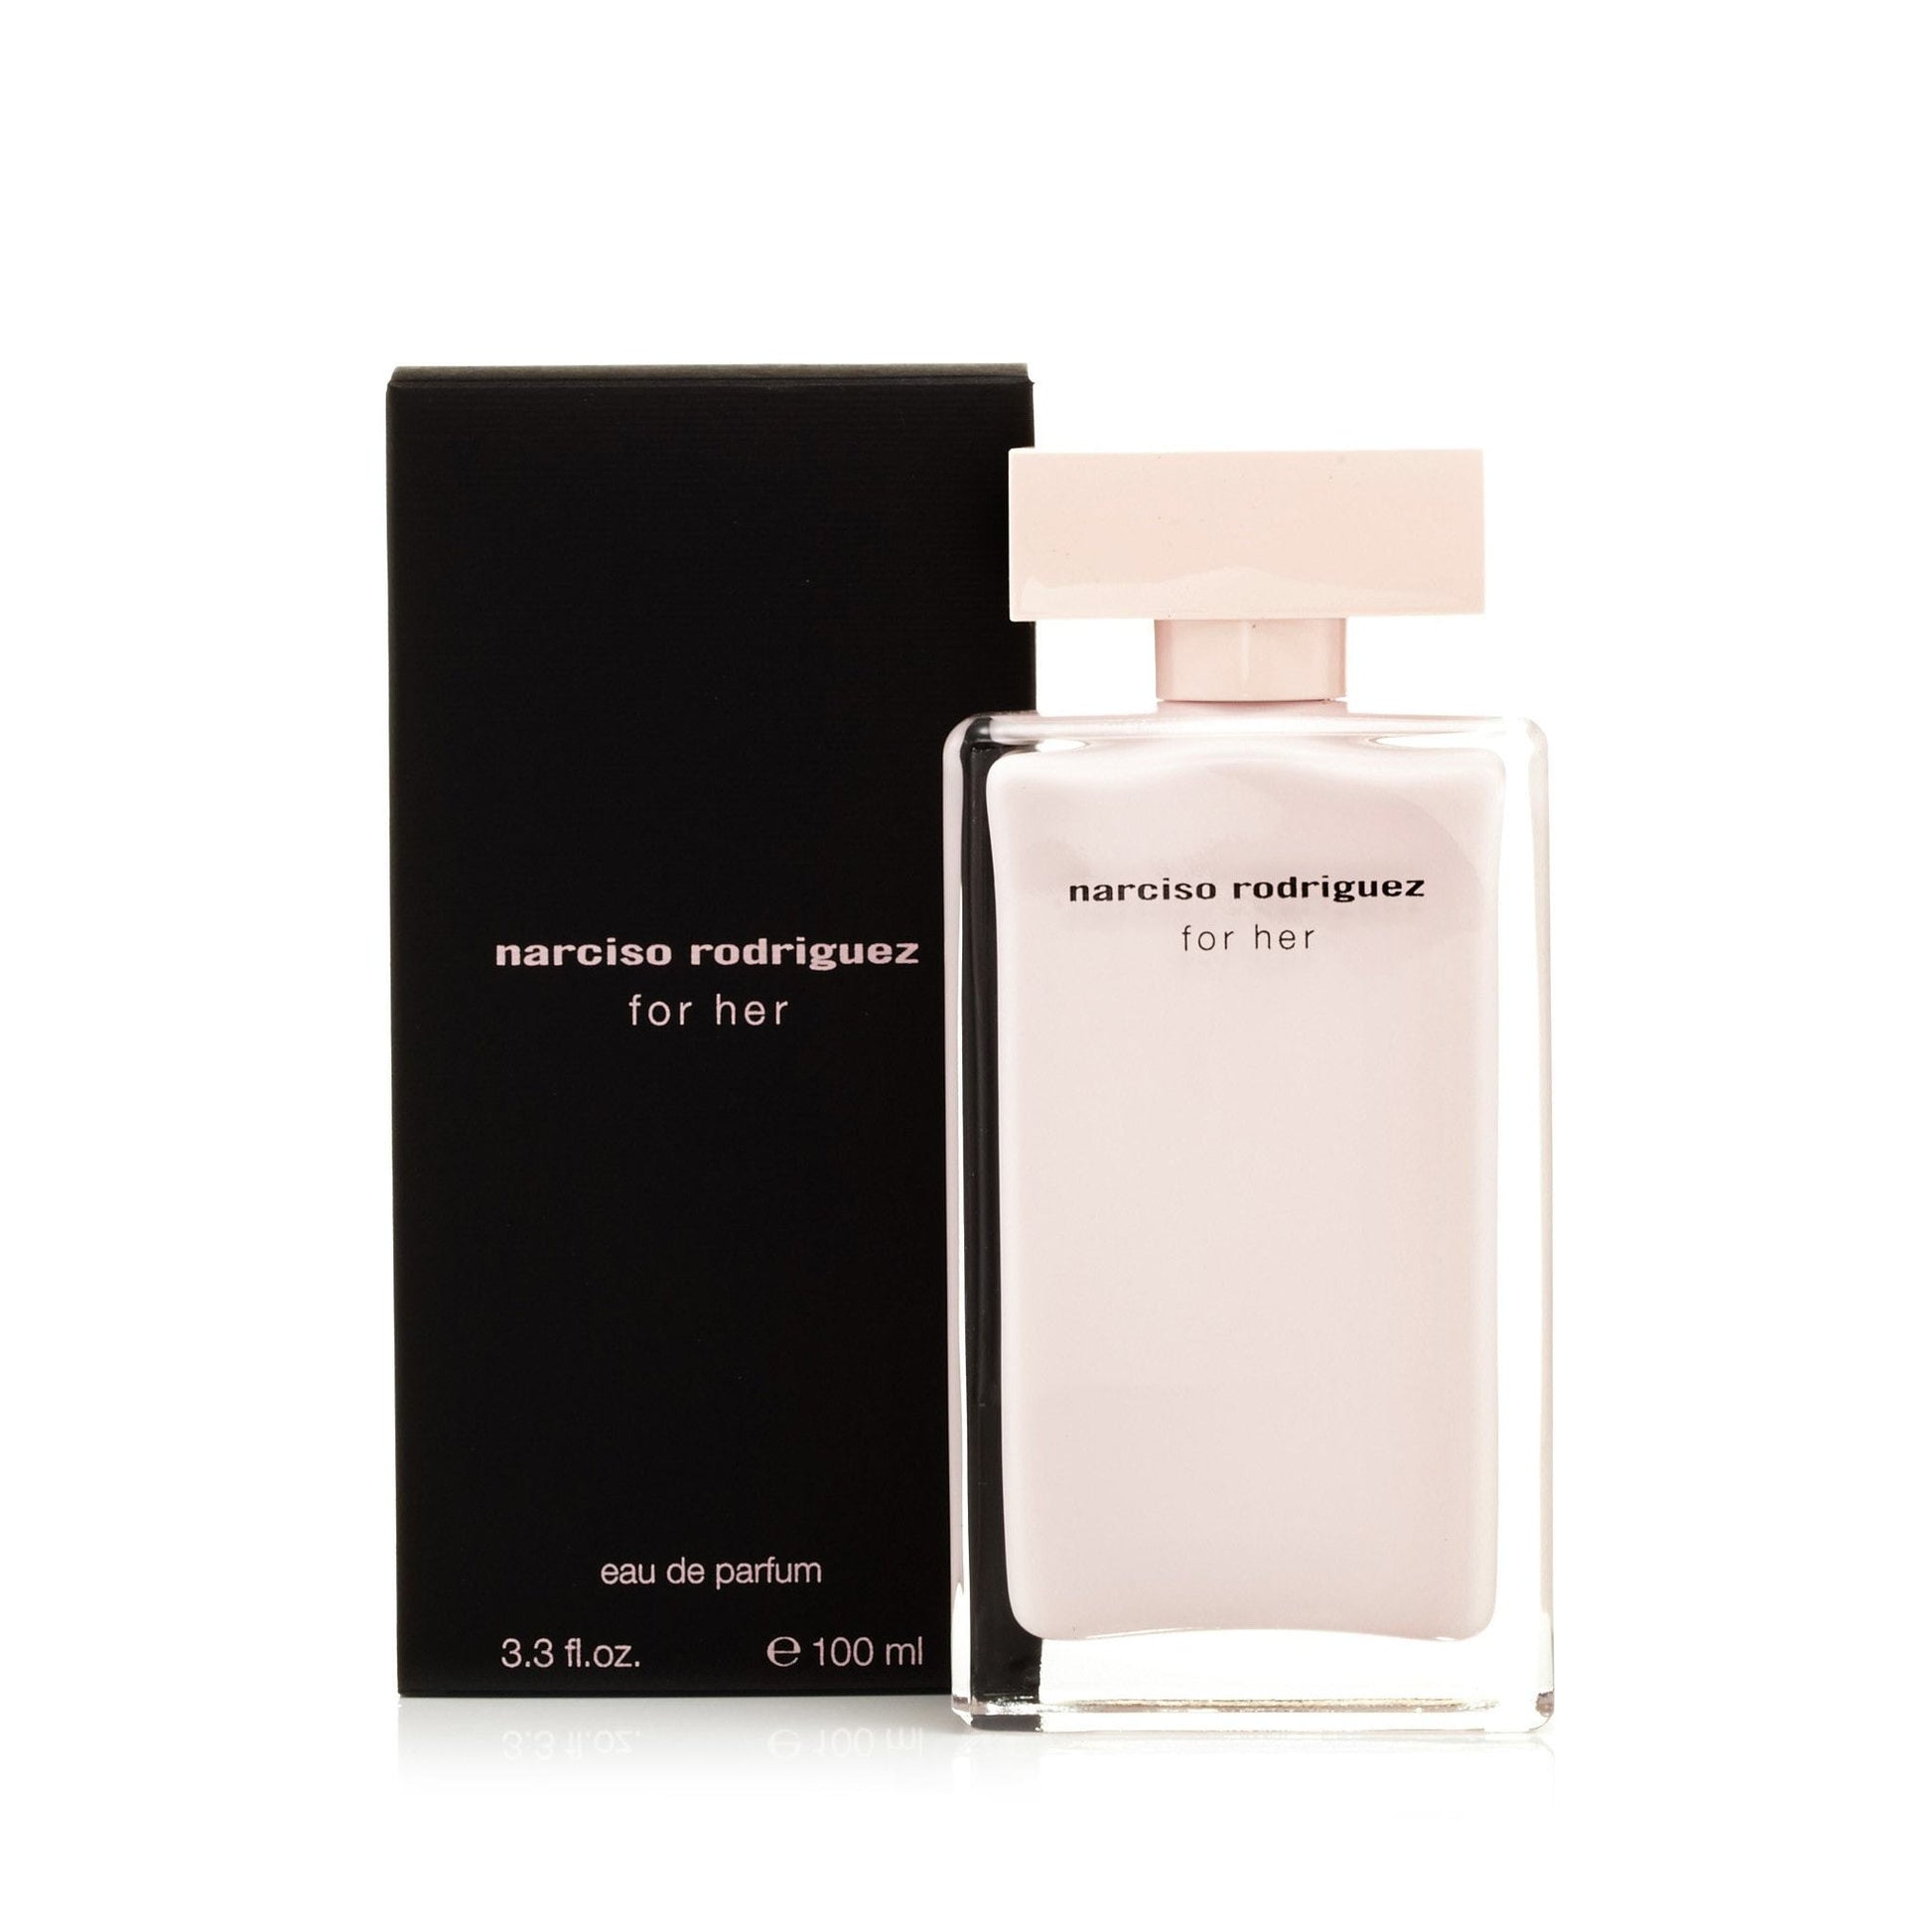 Narciso Rodriguez Eau de Parfum Spray for Women by Narciso Rodriguez, Product image 1